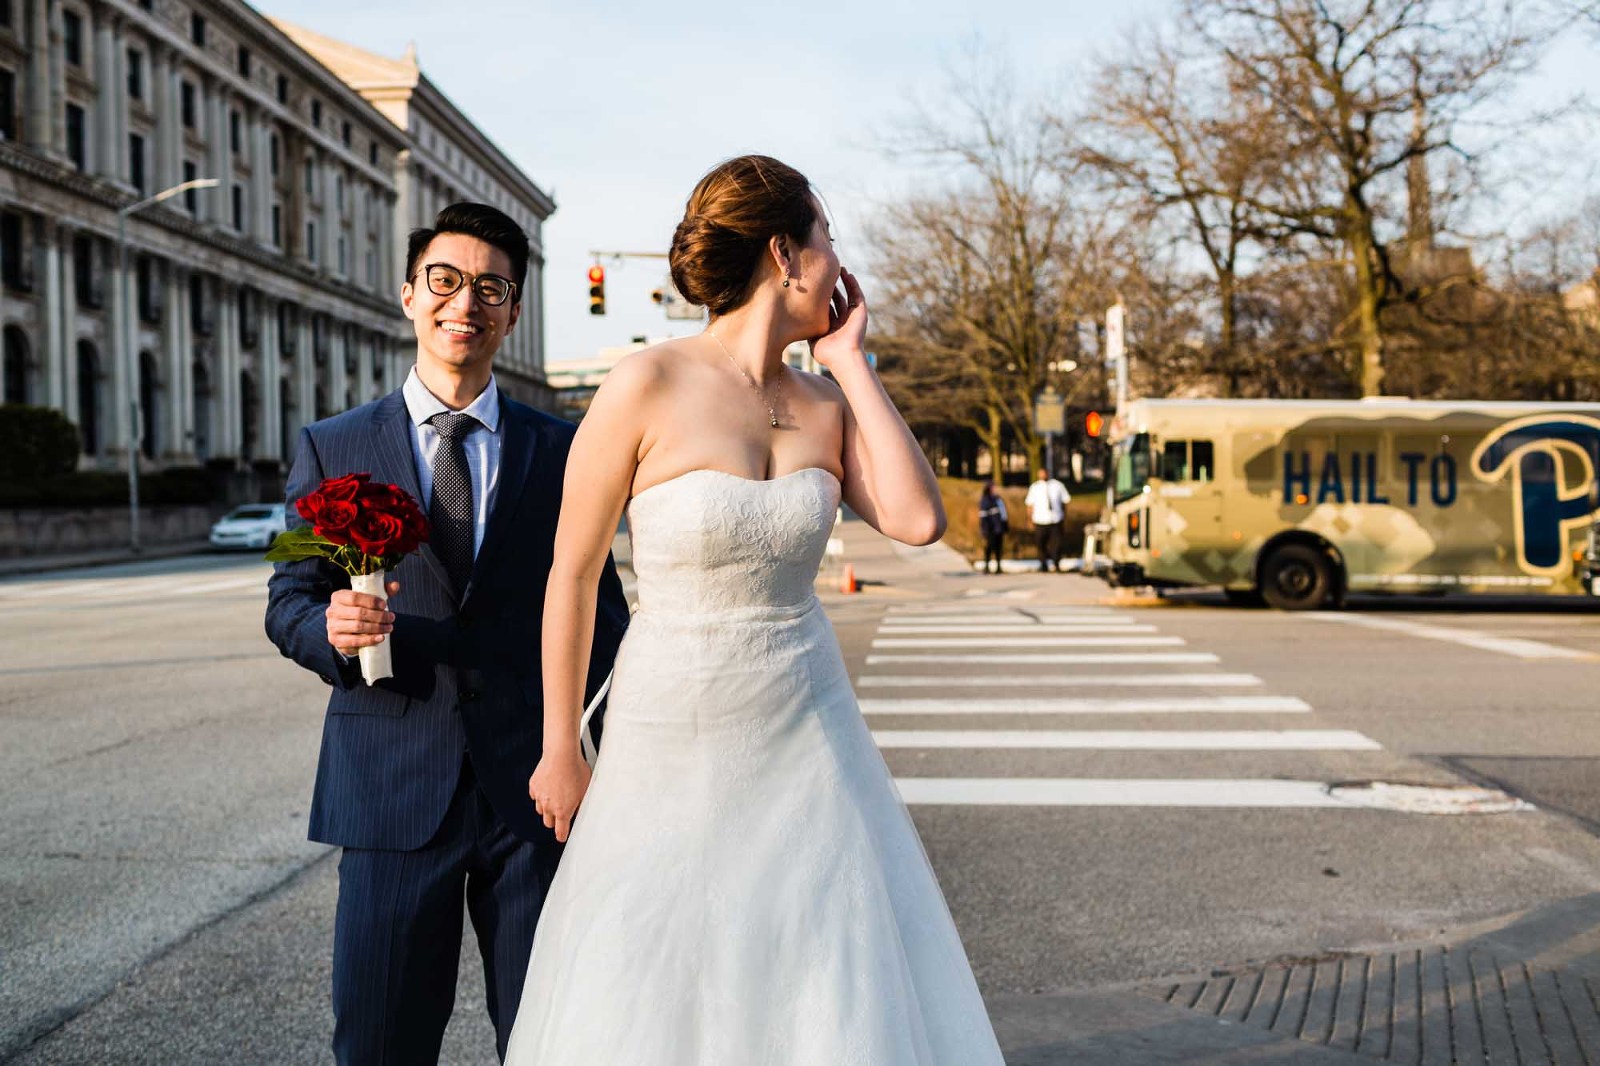 bride and groom pause on a street corner to laugh back at the scene behind them, in a casual candid moment